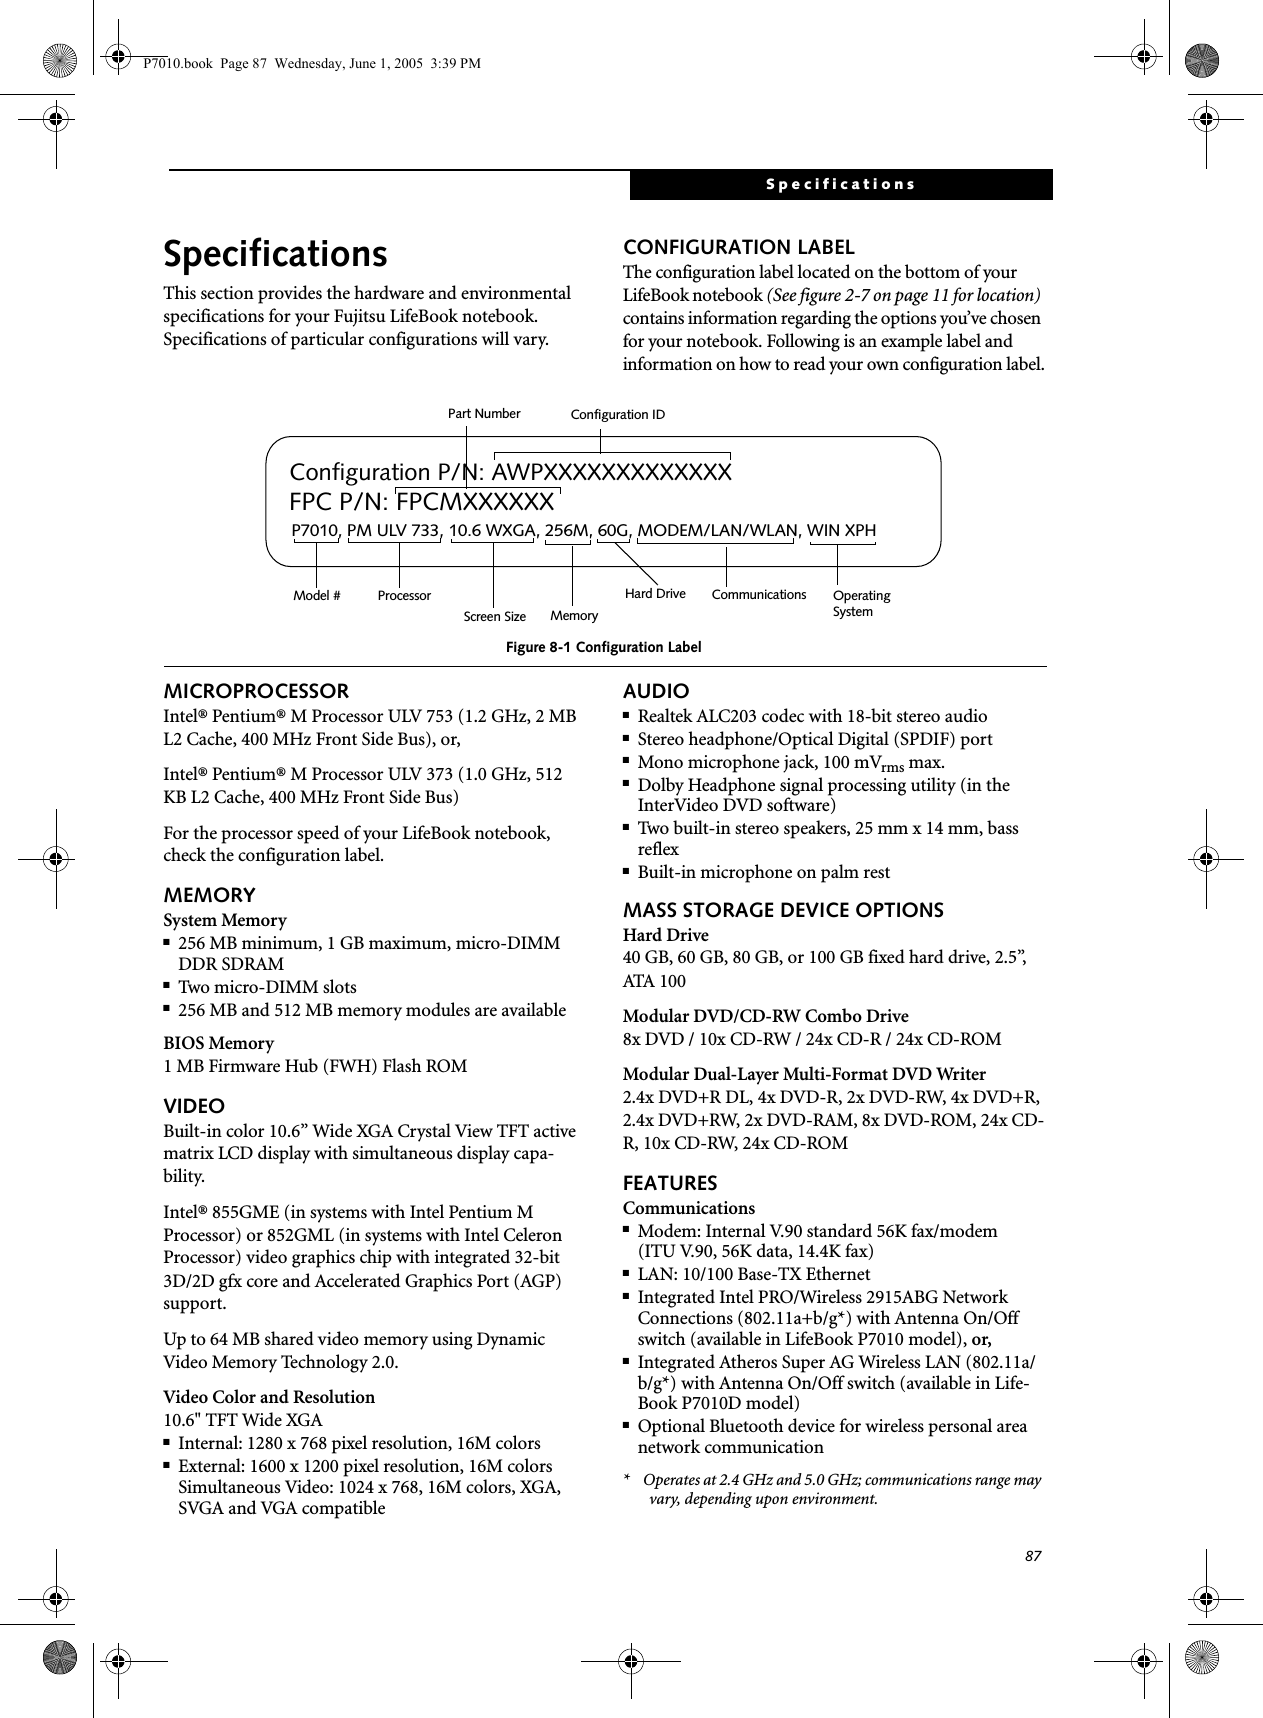 87SpecificationsSpecificationsThis section provides the hardware and environmental specifications for your Fujitsu LifeBook notebook.Specifications of particular configurations will vary.CONFIGURATION LABELThe configuration label located on the bottom of your LifeBook notebook (See figure 2-7 on page 11 for location) contains information regarding the options you’ve chosen for your notebook. Following is an example label and information on how to read your own configuration label.Figure 8-1 Configuration LabelMICROPROCESSORIntel® Pentium® M Processor ULV 753 (1.2 GHz, 2 MB L2 Cache, 400 MHz Front Side Bus), or,Intel® Pentium® M Processor ULV 373 (1.0 GHz, 512 KB L2 Cache, 400 MHz Front Side Bus) For the processor speed of your LifeBook notebook, check the configuration label.MEMORYSystem Memory■256 MB minimum, 1 GB maximum, micro-DIMM DDR SDRAM■Two micro-DIMM slots■256 MB and 512 MB memory modules are availableBIOS Memory1 MB Firmware Hub (FWH) Flash ROMVIDEOBuilt-in color 10.6” Wide XGA Crystal View TFT active matrix LCD display with simultaneous display capa-bility.Intel® 855GME (in systems with Intel Pentium M Processor) or 852GML (in systems with Intel Celeron Processor) video graphics chip with integrated 32-bit 3D/2D gfx core and Accelerated Graphics Port (AGP) support. Up to 64 MB shared video memory using Dynamic Video Memory Technology 2.0.Video Color and Resolution10.6&quot; TFT Wide XGA■Internal: 1280 x 768 pixel resolution, 16M colors■External: 1600 x 1200 pixel resolution, 16M colorsSimultaneous Video: 1024 x 768, 16M colors, XGA, SVGA and VGA compatibleAUDIO■Realtek ALC203 codec with 18-bit stereo audio■Stereo headphone/Optical Digital (SPDIF) port ■Mono microphone jack, 100 mVrms max.■Dolby Headphone signal processing utility (in the InterVideo DVD software)■Two built-in stereo speakers, 25 mm x 14 mm, bass reflex■Built-in microphone on palm restMASS STORAGE DEVICE OPTIONSHard Drive40 GB, 60 GB, 80 GB, or 100 GB fixed hard drive, 2.5”, ATA 100Modular DVD/CD-RW Combo Drive8x DVD / 10x CD-RW / 24x CD-R / 24x CD-ROMModular Dual-Layer Multi-Format DVD Writer2.4x DVD+R DL, 4x DVD-R, 2x DVD-RW, 4x DVD+R, 2.4x DVD+RW, 2x DVD-RAM, 8x DVD-ROM, 24x CD-R, 10x CD-RW, 24x CD-ROMFEATURESCommunications■Modem: Internal V.90 standard 56K fax/modem(ITU V.90, 56K data, 14.4K fax) ■LAN: 10/100 Base-TX Ethernet ■Integrated Intel PRO/Wireless 2915ABG Network Connections (802.11a+b/g*) with Antenna On/Off switch (available in LifeBook P7010 model), or,■Integrated Atheros Super AG Wireless LAN (802.11a/b/g*) with Antenna On/Off switch (available in Life-Book P7010D model)■Optional Bluetooth device for wireless personal area network communication*    Operates at 2.4 GHz and 5.0 GHz; communications range may vary, depending upon environment.P7010, PM ULV 733, 10.6 WXGA, 256M, 60G, MODEM/LAN/WLAN, WIN XPHConfiguration P/N: AWPXXXXXXXXXXXXXFPC P/N: FPCMXXXXXXOperating Hard Drive Configuration IDPart NumberProcessorModel #Screen Size Memory SystemCommunicationsP7010.book  Page 87  Wednesday, June 1, 2005  3:39 PM